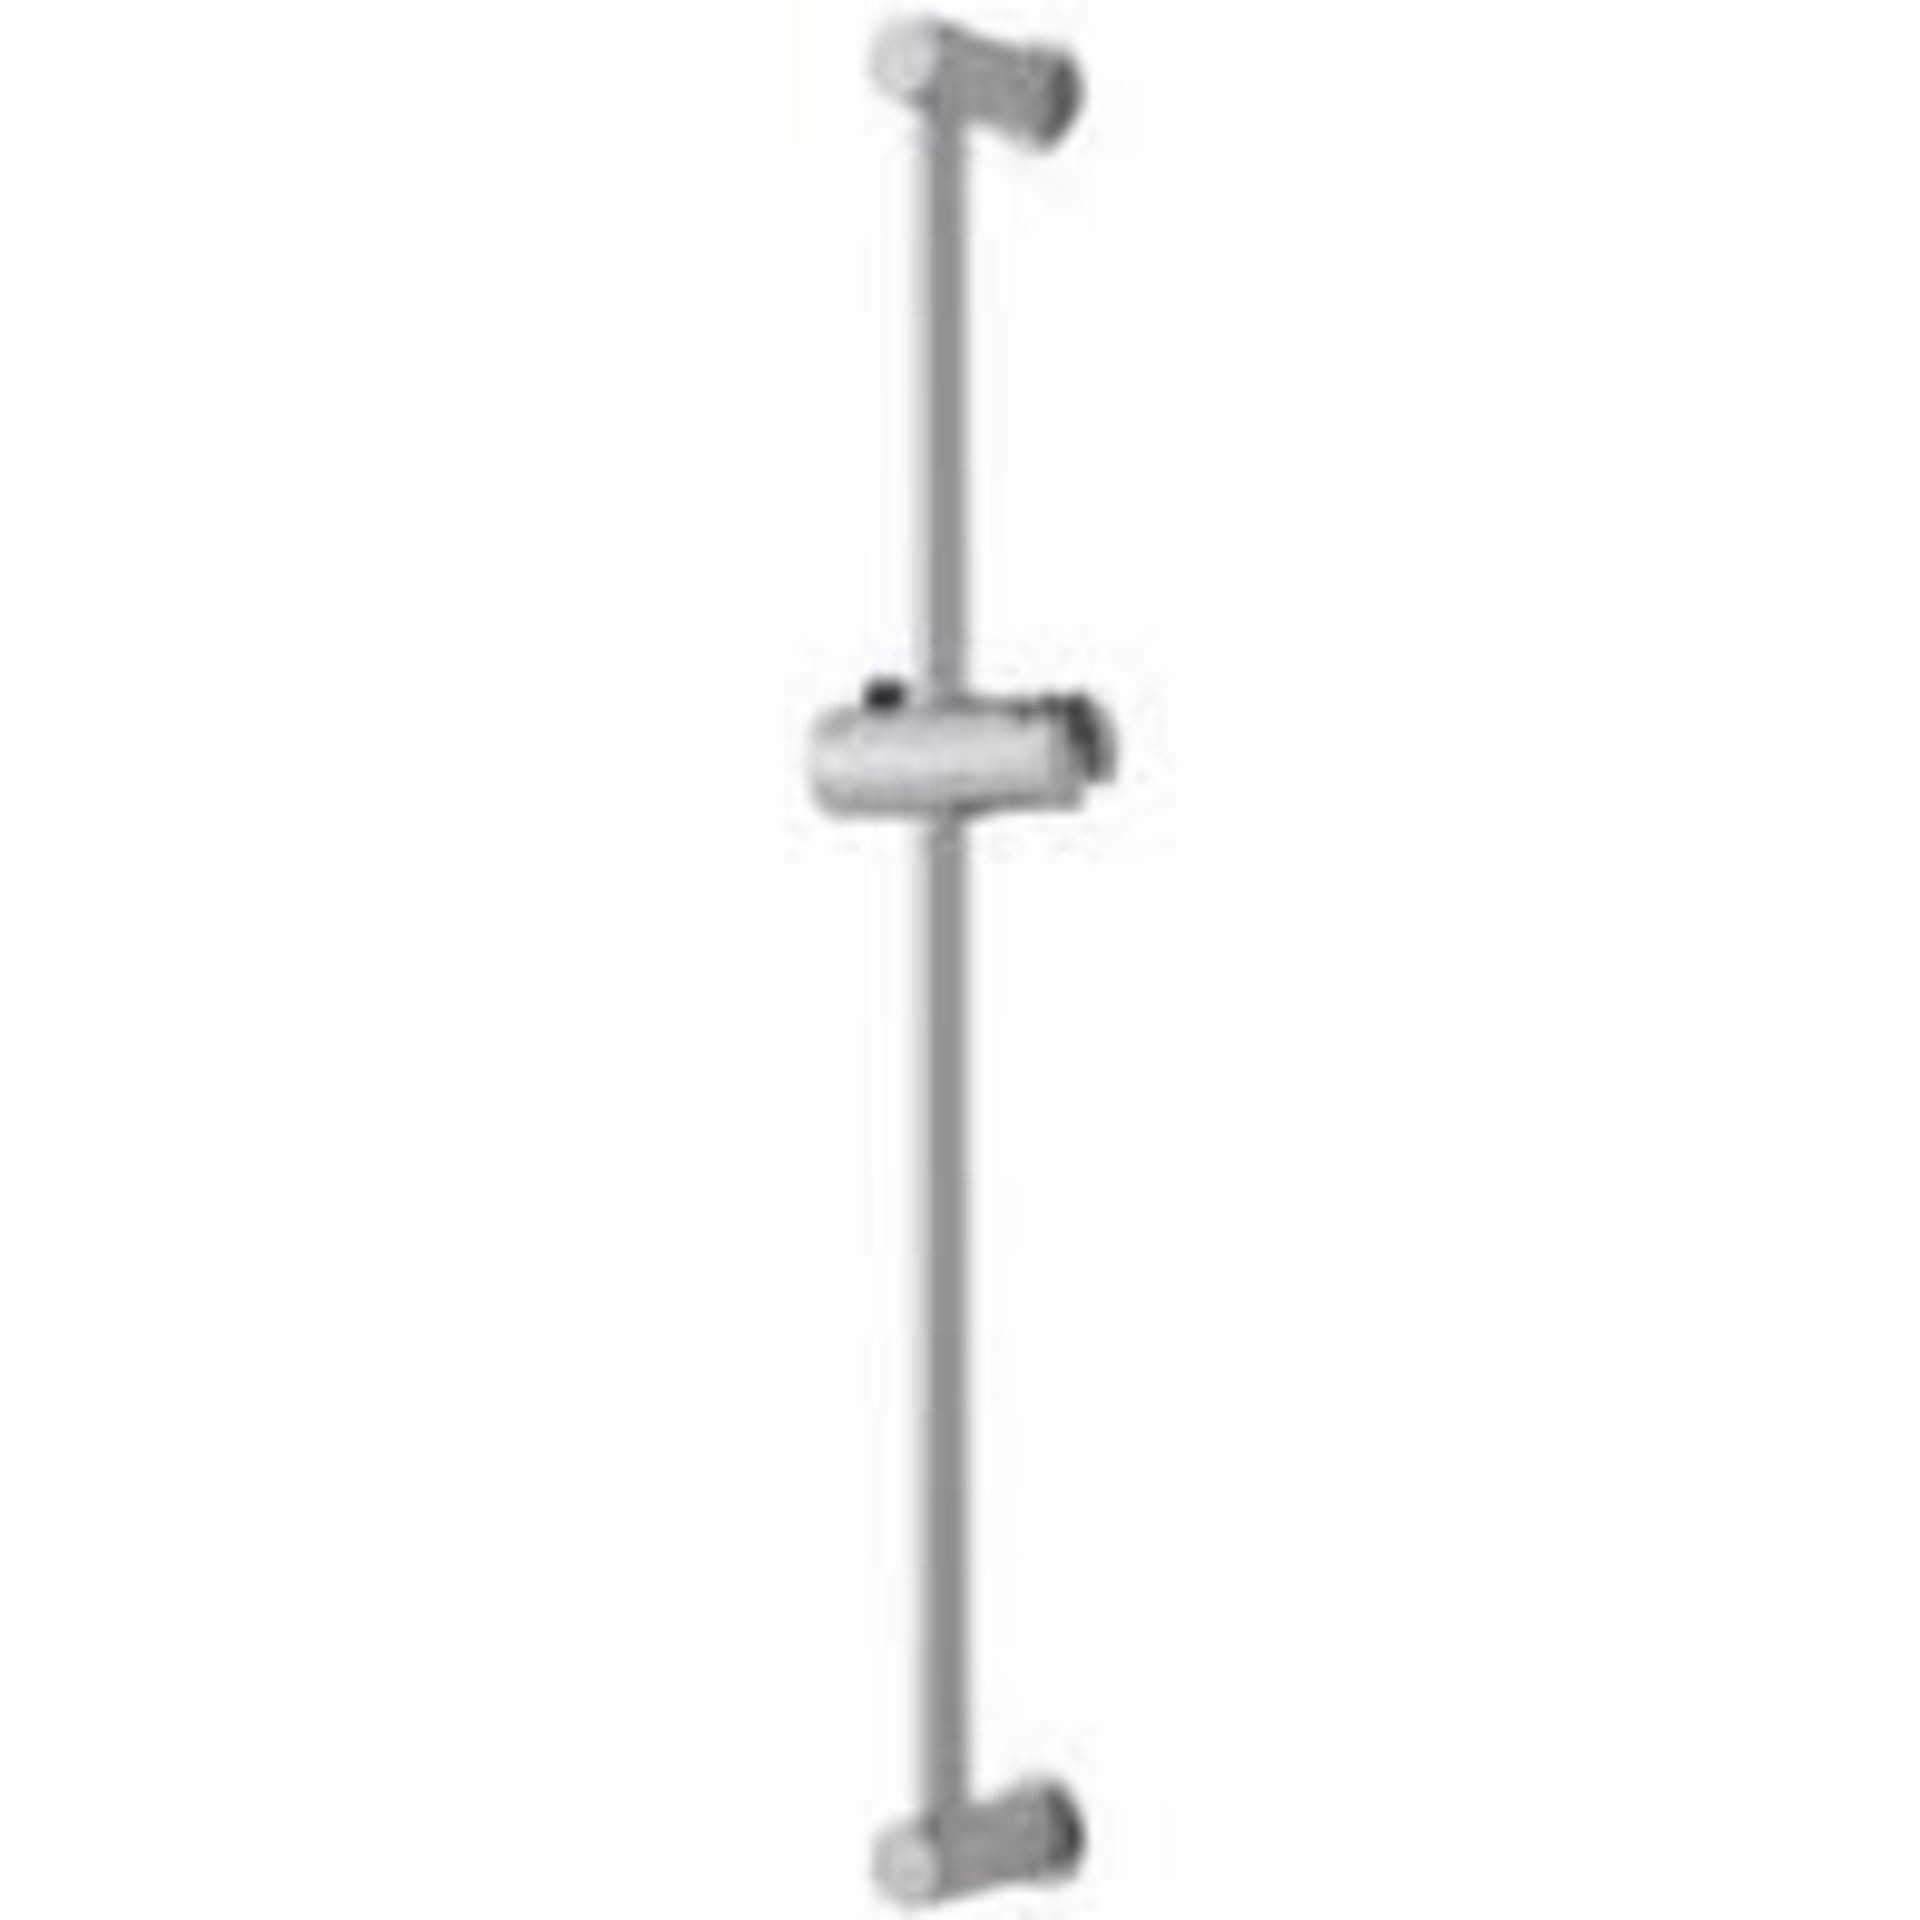 (XL82) Chrome effect Classic shower riser rail. The adjustable riser rail enables you to use t...(